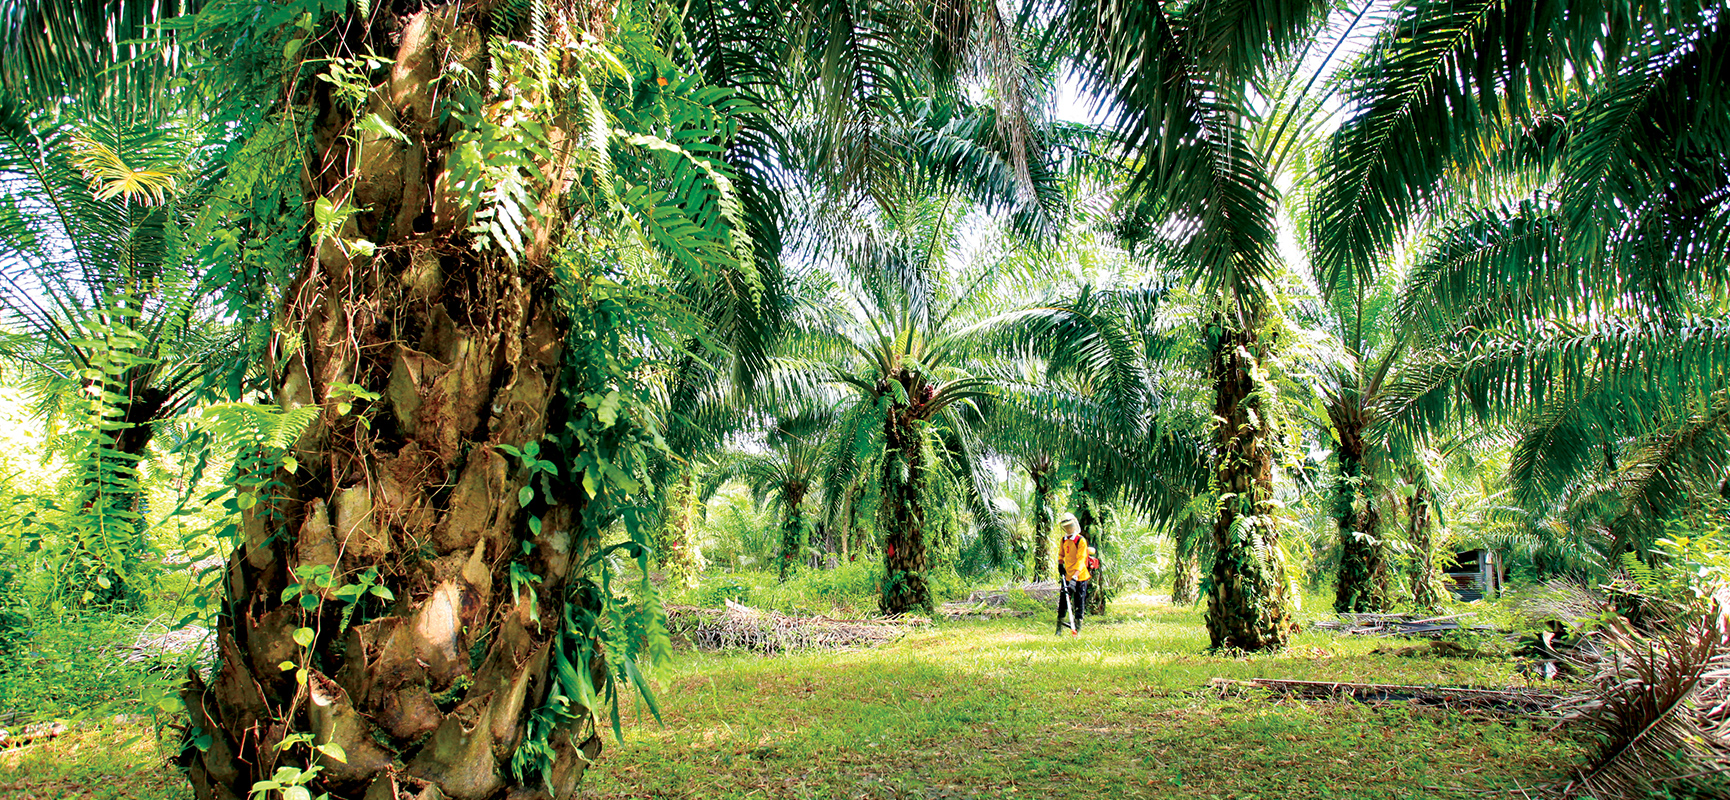 Sunny day in a palm oil plantation field.